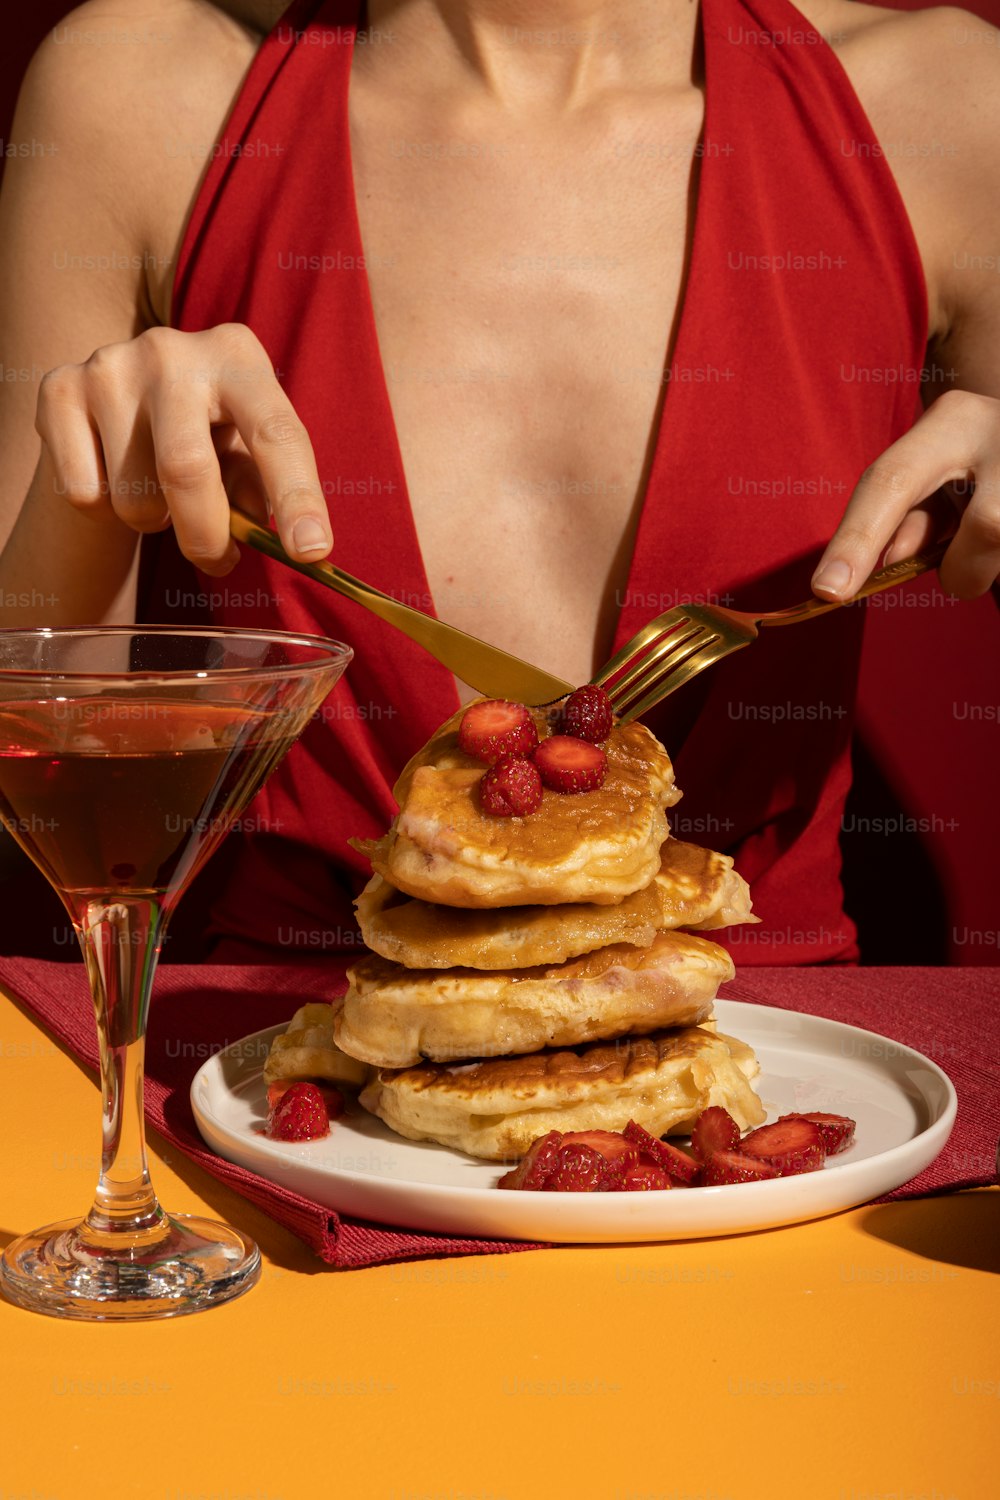 a woman sitting at a table with a plate of pancakes and a martini